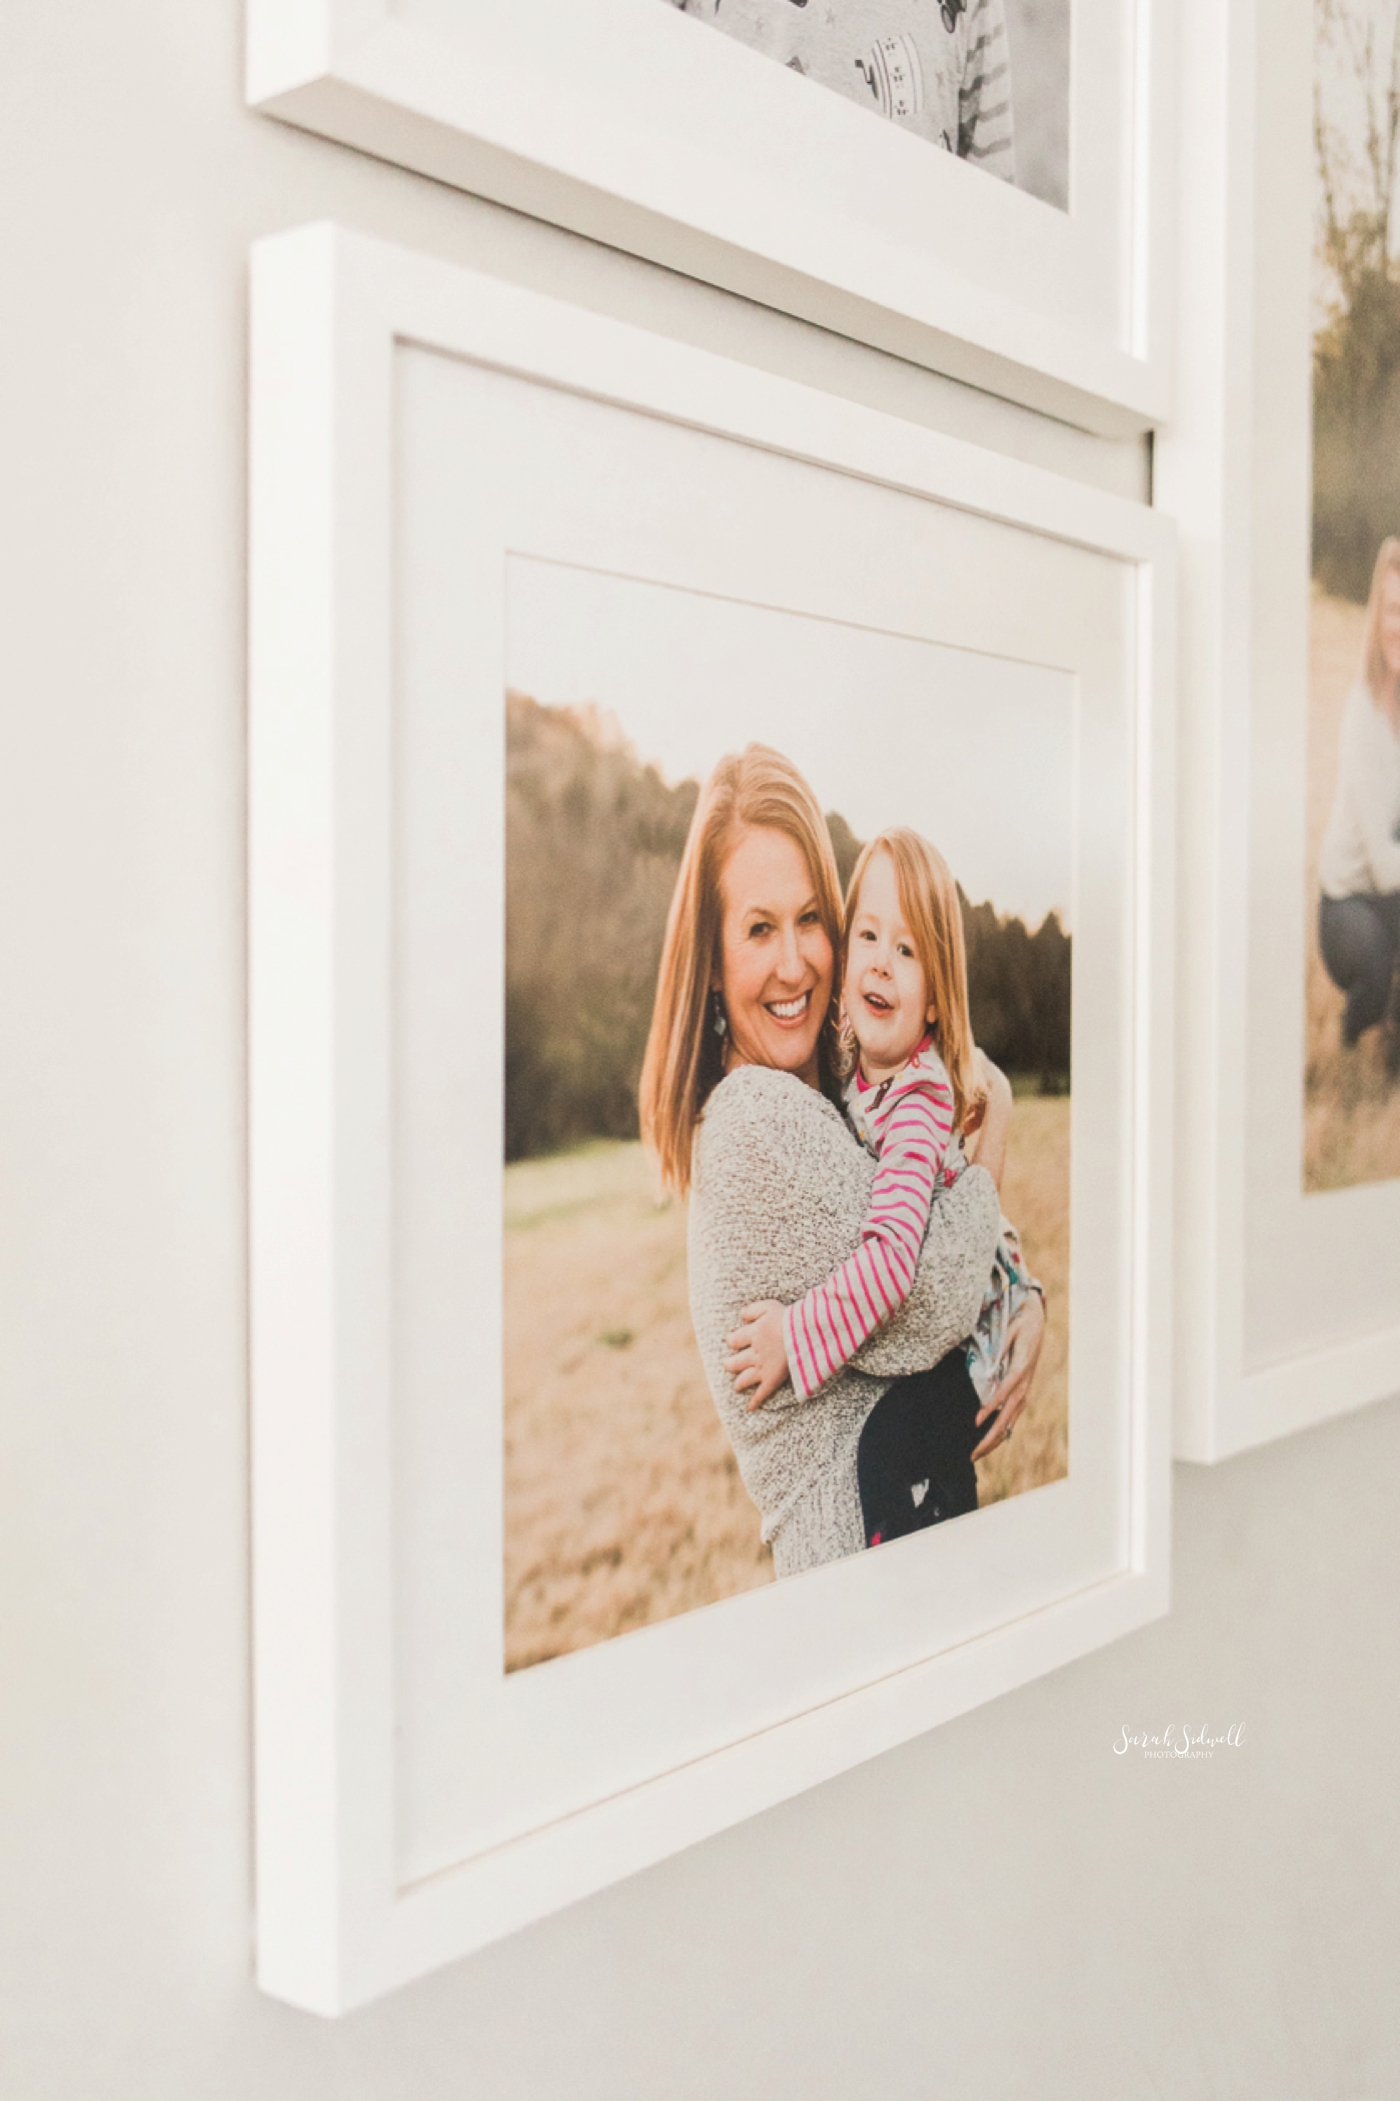 Gallery Wall Install | Sarah Sidwell Photography